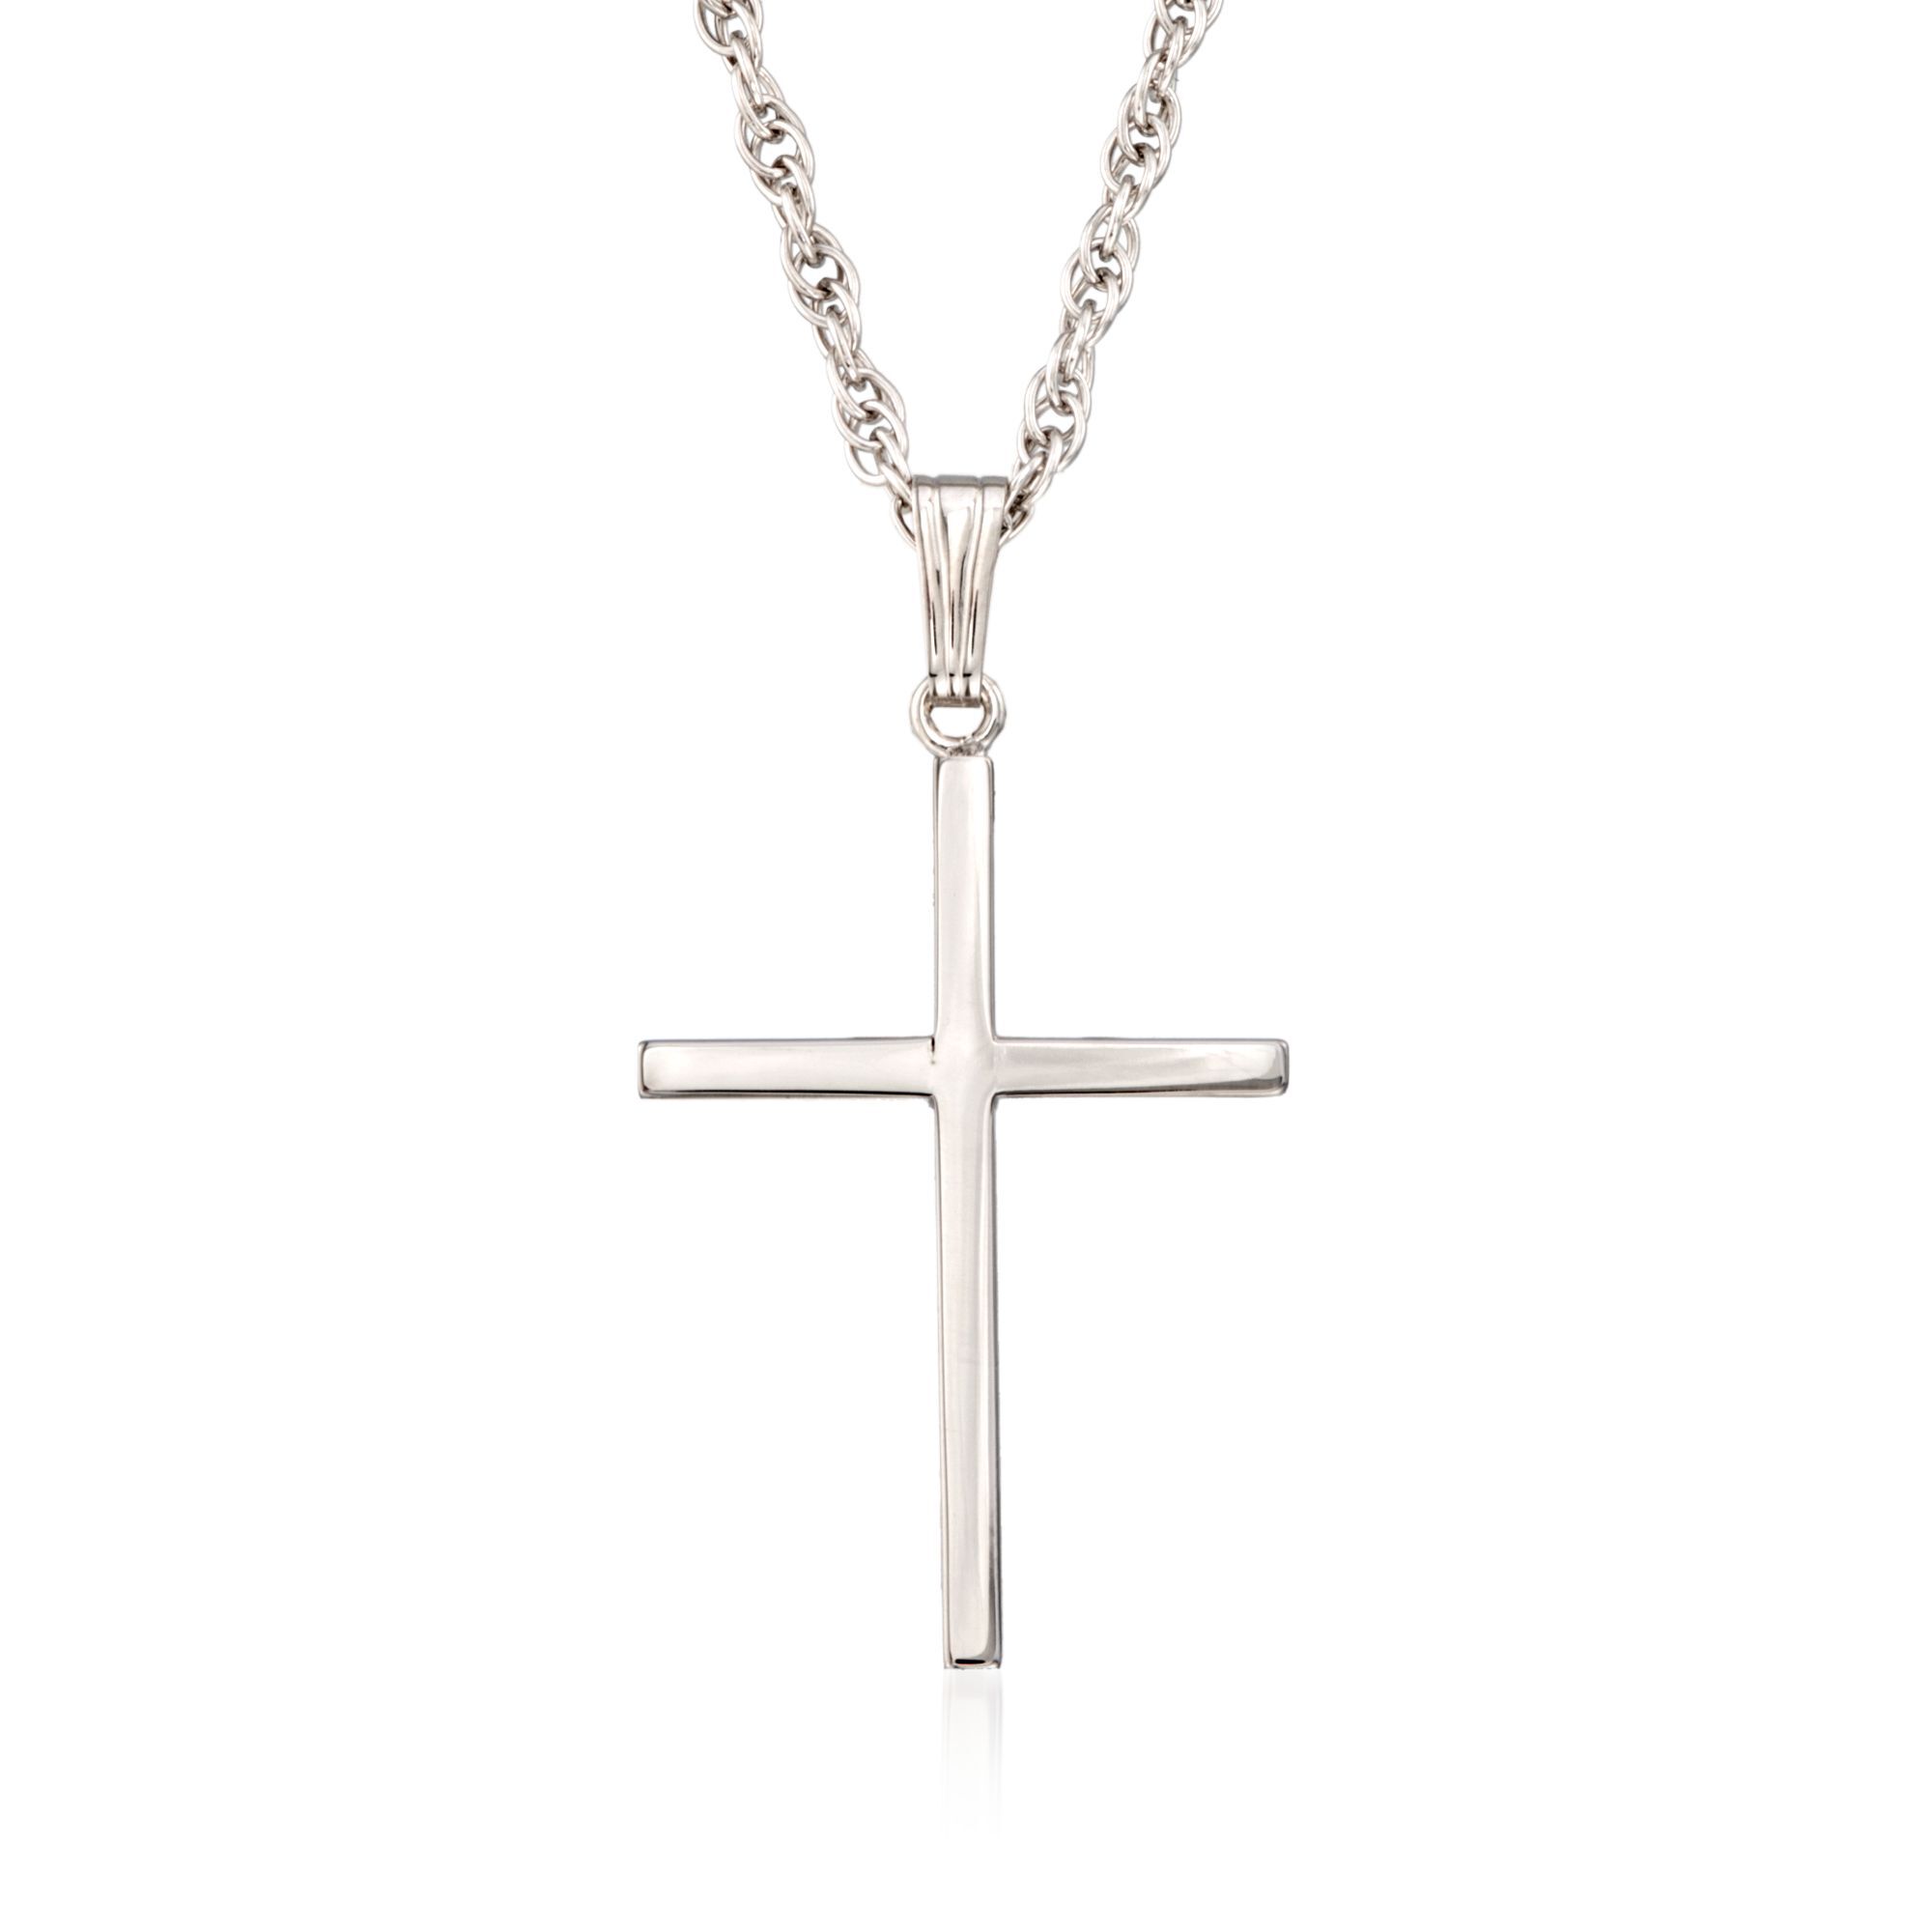 TEMPBEAU Christian Cross Pendant Mini Size Silver Retro Grey for Men and Women with 51cm Chain Jewelry Gift Unisex Cross Necklace Stainless Steel